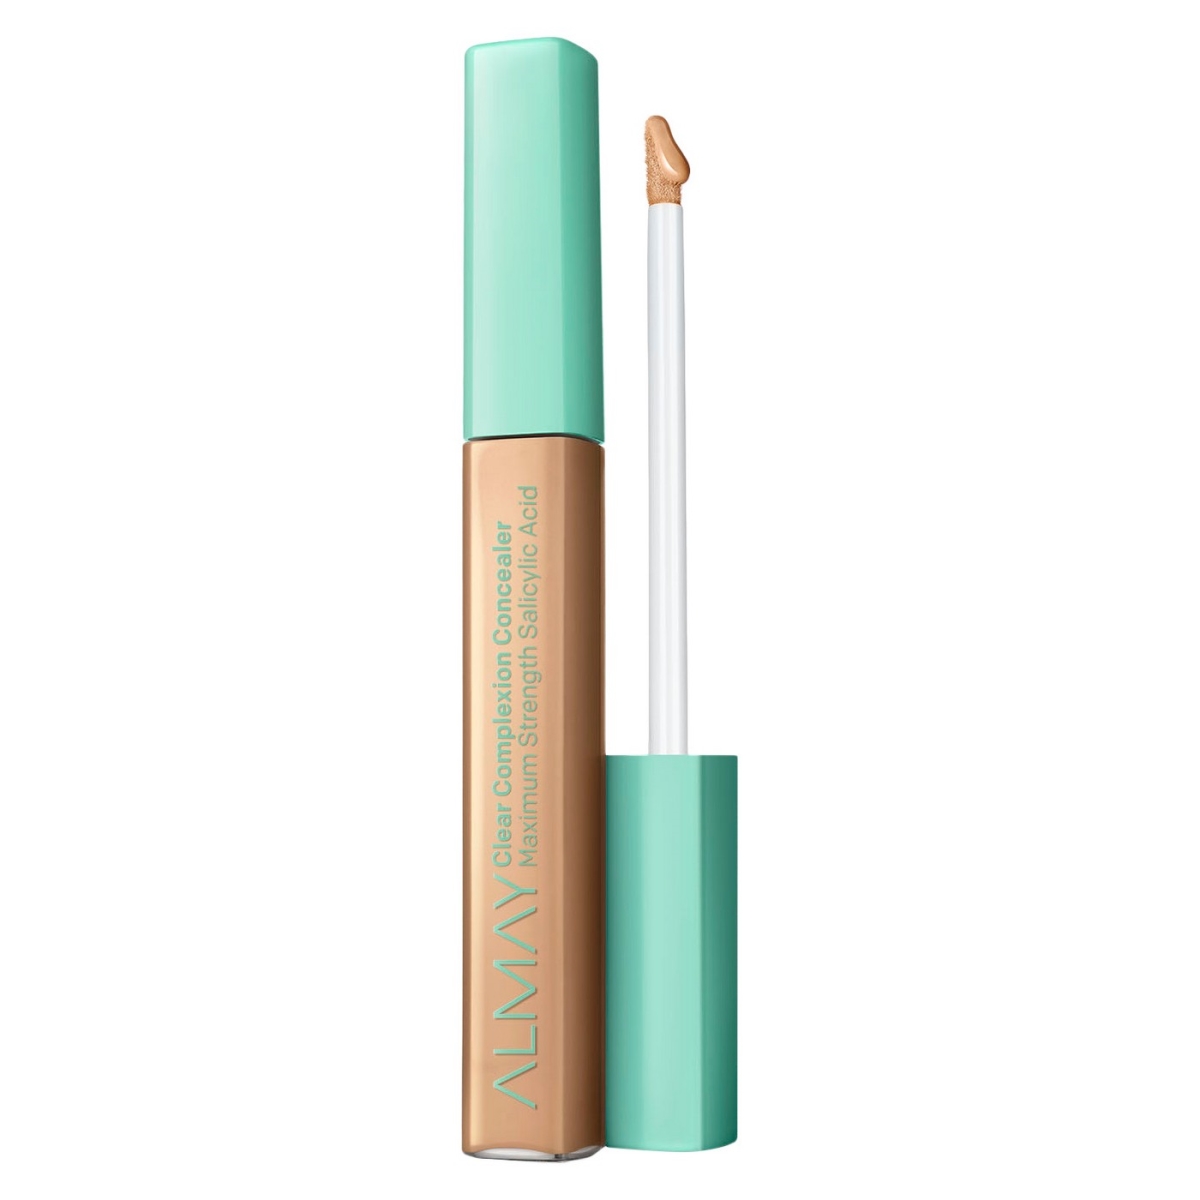 43123637 Almay Clear Complexion Concealer - 400 Medium & Deep, Pack Of 2